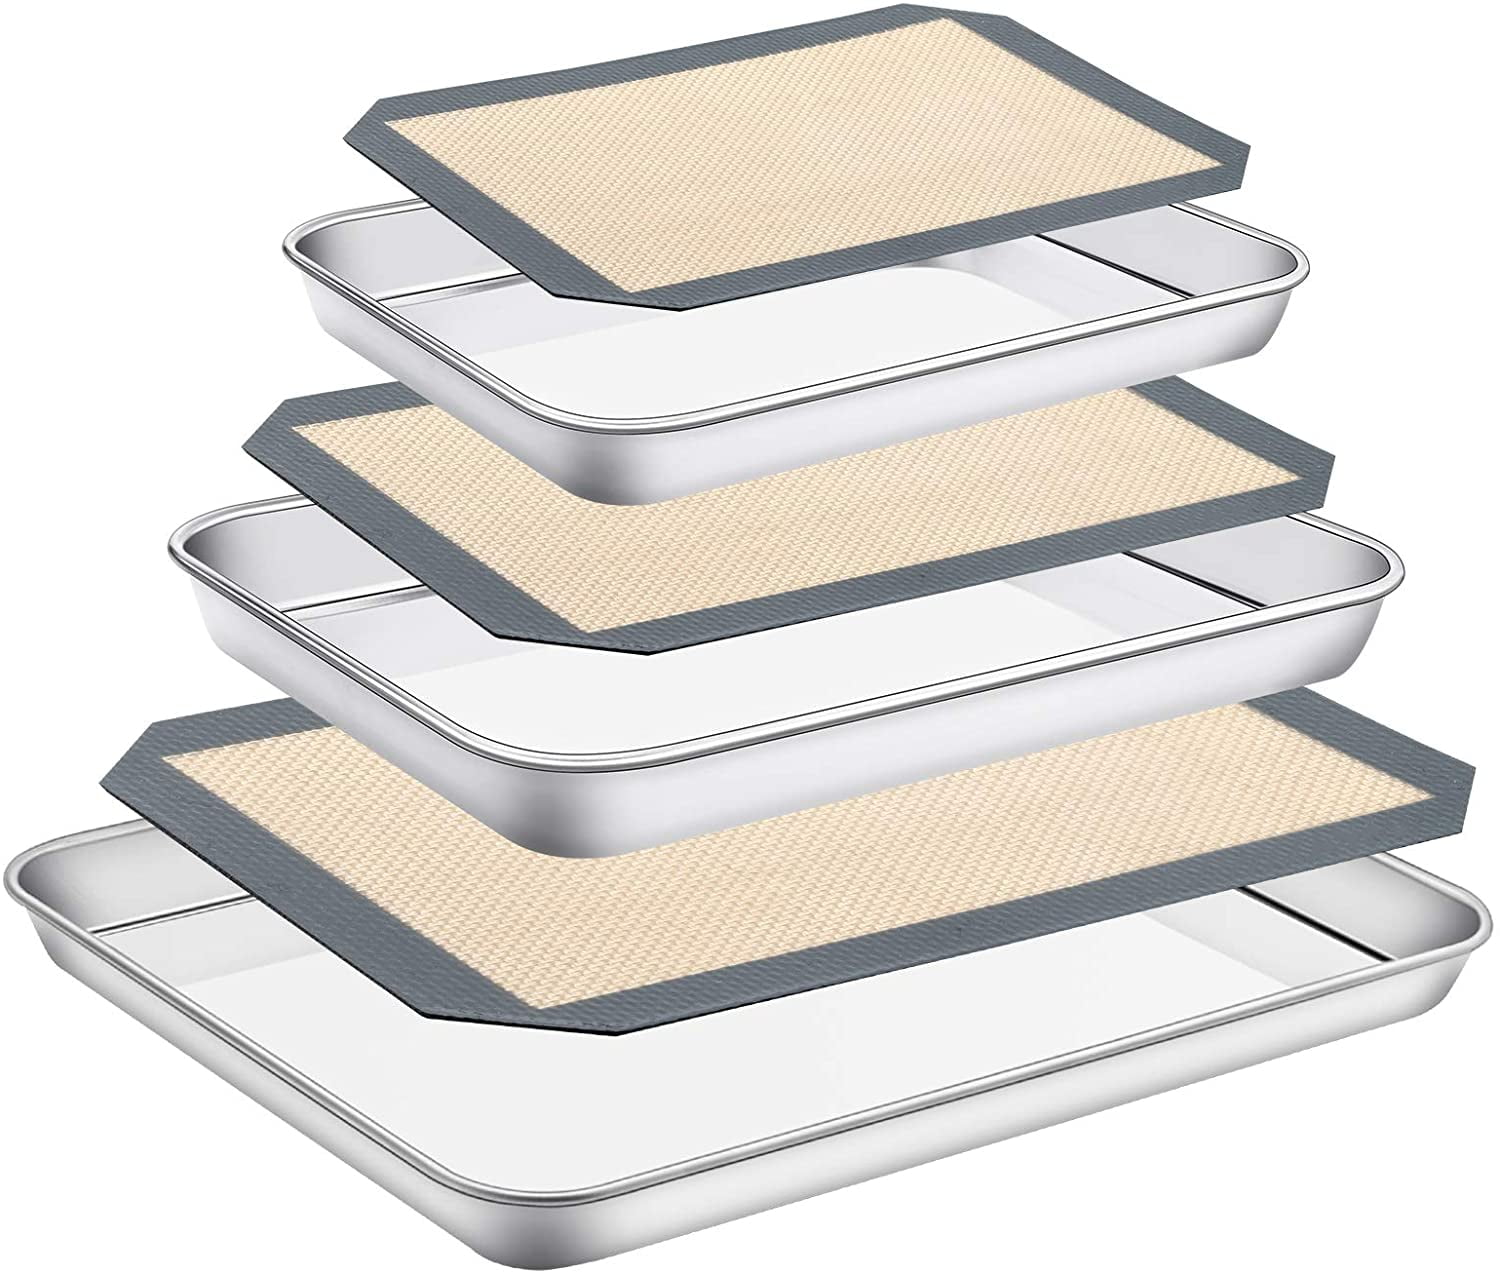 Baking Sheet with Silicone Mat Set Stainless Steel 3 Sheets + 3 Mats Set of 6 